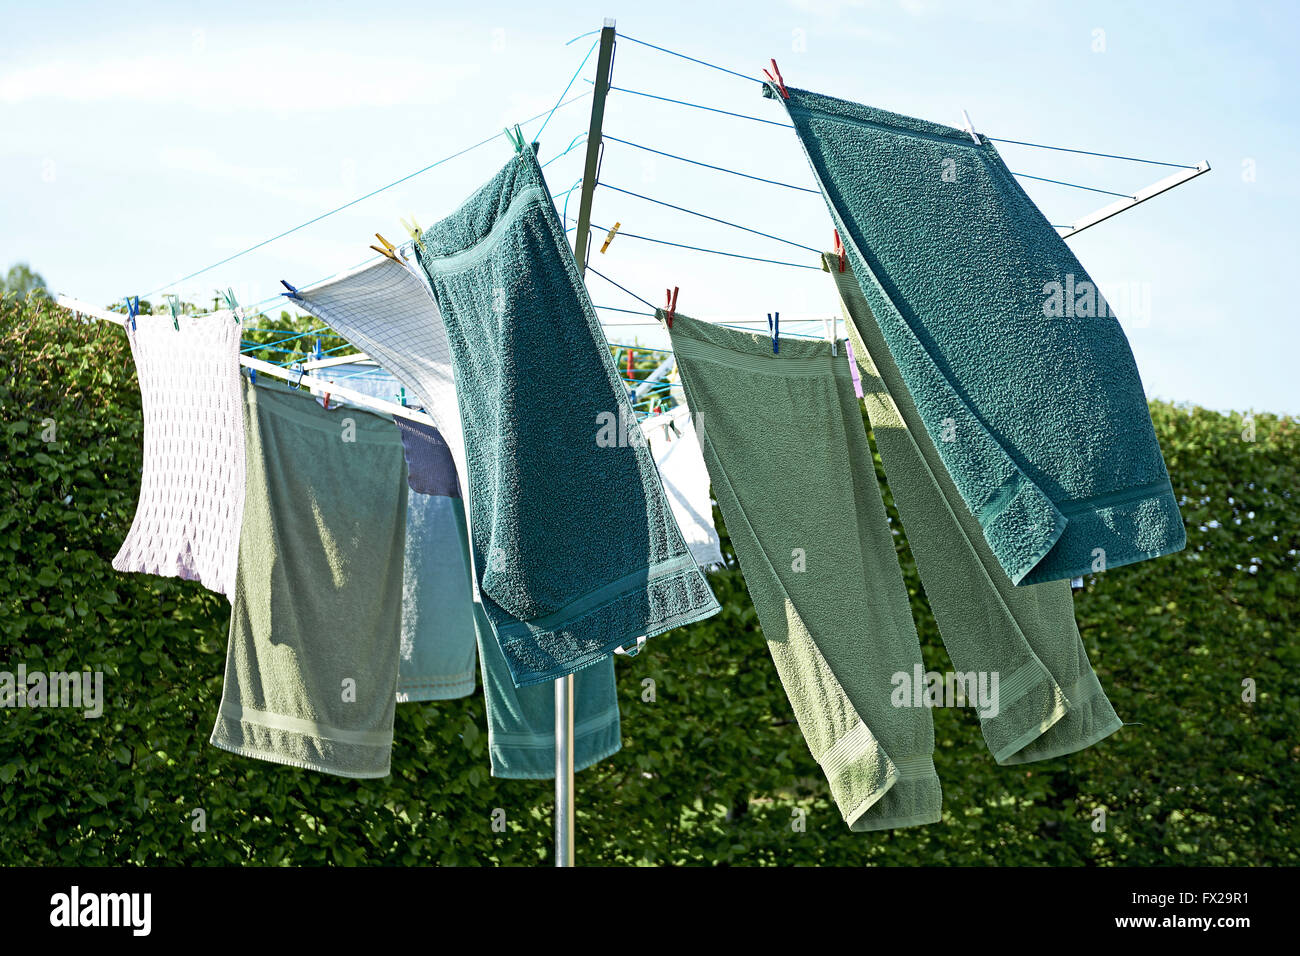 Drying laundry outside in the wind Stock Photo